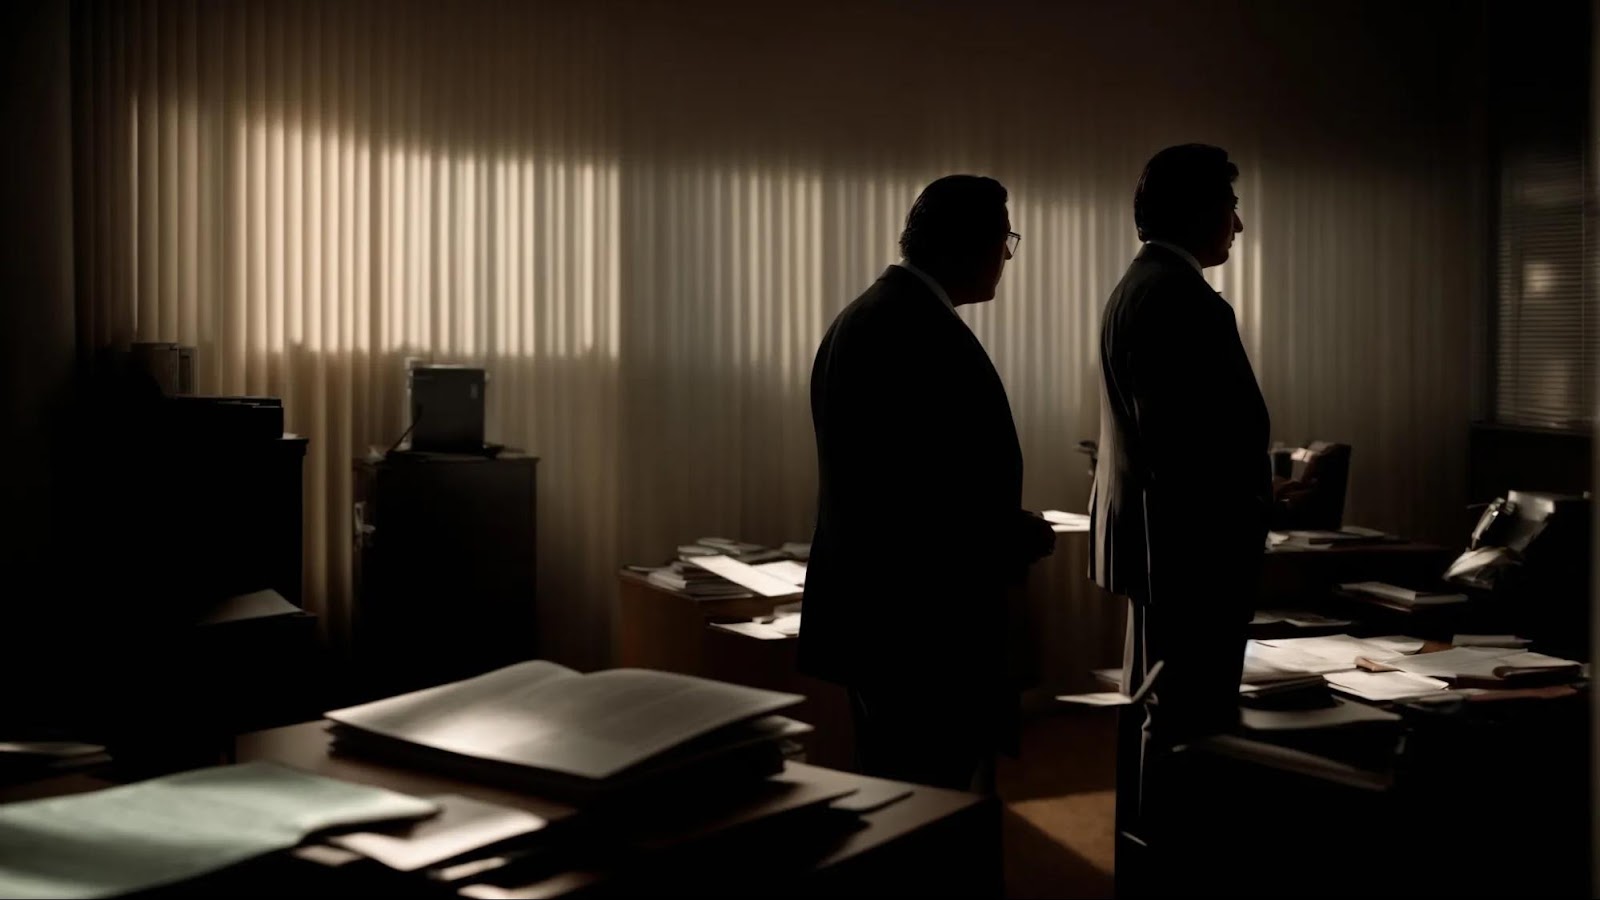 a silhouette of a worried patient conversing with an attorney in a dimly lit office, with thick legal books and medical records scattered around.